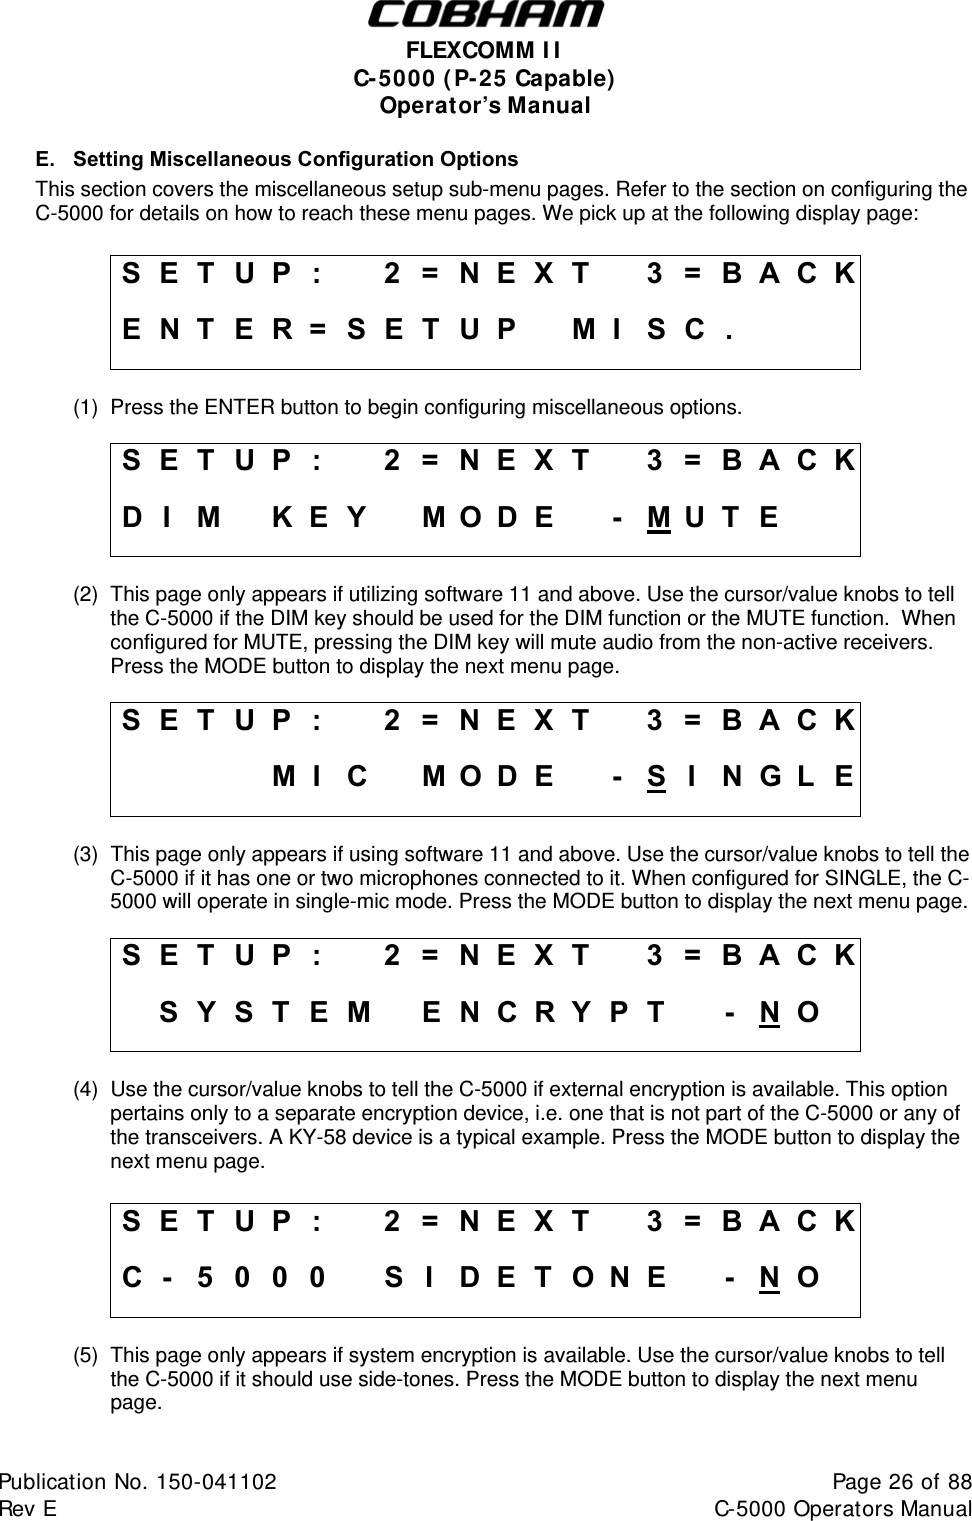  FLEXCOMM I I  C-5000 ( P-25 Capable)  Operator’s Manual E.  Setting Miscellaneous Configuration Options This section covers the miscellaneous setup sub-menu pages. Refer to the section on configuring the C-5000 for details on how to reach these menu pages. We pick up at the following display page:  S E T  U P  :    2 = N E X T   3 = B A C K E N T E R = SETUP   MI SC.      (1)  Press the ENTER button to begin configuring miscellaneous options.  S E T  U P  :    2 = N E X T   3 = B A C K D I M  K E Y  M O D E  - M UT E    (2)  This page only appears if utilizing software 11 and above. Use the cursor/value knobs to tell the C-5000 if the DIM key should be used for the DIM function or the MUTE function.  When configured for MUTE, pressing the DIM key will mute audio from the non-active receivers.  Press the MODE button to display the next menu page.  S E T  U P  :    2 = N E X T   3 = B A C K     M I C MODE -SIN G L  E (3)  This page only appears if using software 11 and above. Use the cursor/value knobs to tell the C-5000 if it has one or two microphones connected to it. When configured for SINGLE, the C-5000 will operate in single-mic mode. Press the MODE button to display the next menu page.  S E T  U P  :    2 = N E X T   3 = B A C K   S Y S T E M   E N C R Y P T   - N O   (4)  Use the cursor/value knobs to tell the C-5000 if external encryption is available. This option pertains only to a separate encryption device, i.e. one that is not part of the C-5000 or any of the transceivers. A KY-58 device is a typical example. Press the MODE button to display the next menu page.  S E T  U P  :    2 = N E X T   3 = B A C K C -  5 0 0 0    S I D E T O N E   - N O   (5)  This page only appears if system encryption is available. Use the cursor/value knobs to tell the C-5000 if it should use side-tones. Press the MODE button to display the next menu page.  Publication No. 150-041102  Page 26 of 88  Rev E  C-5000 Operators Manual    